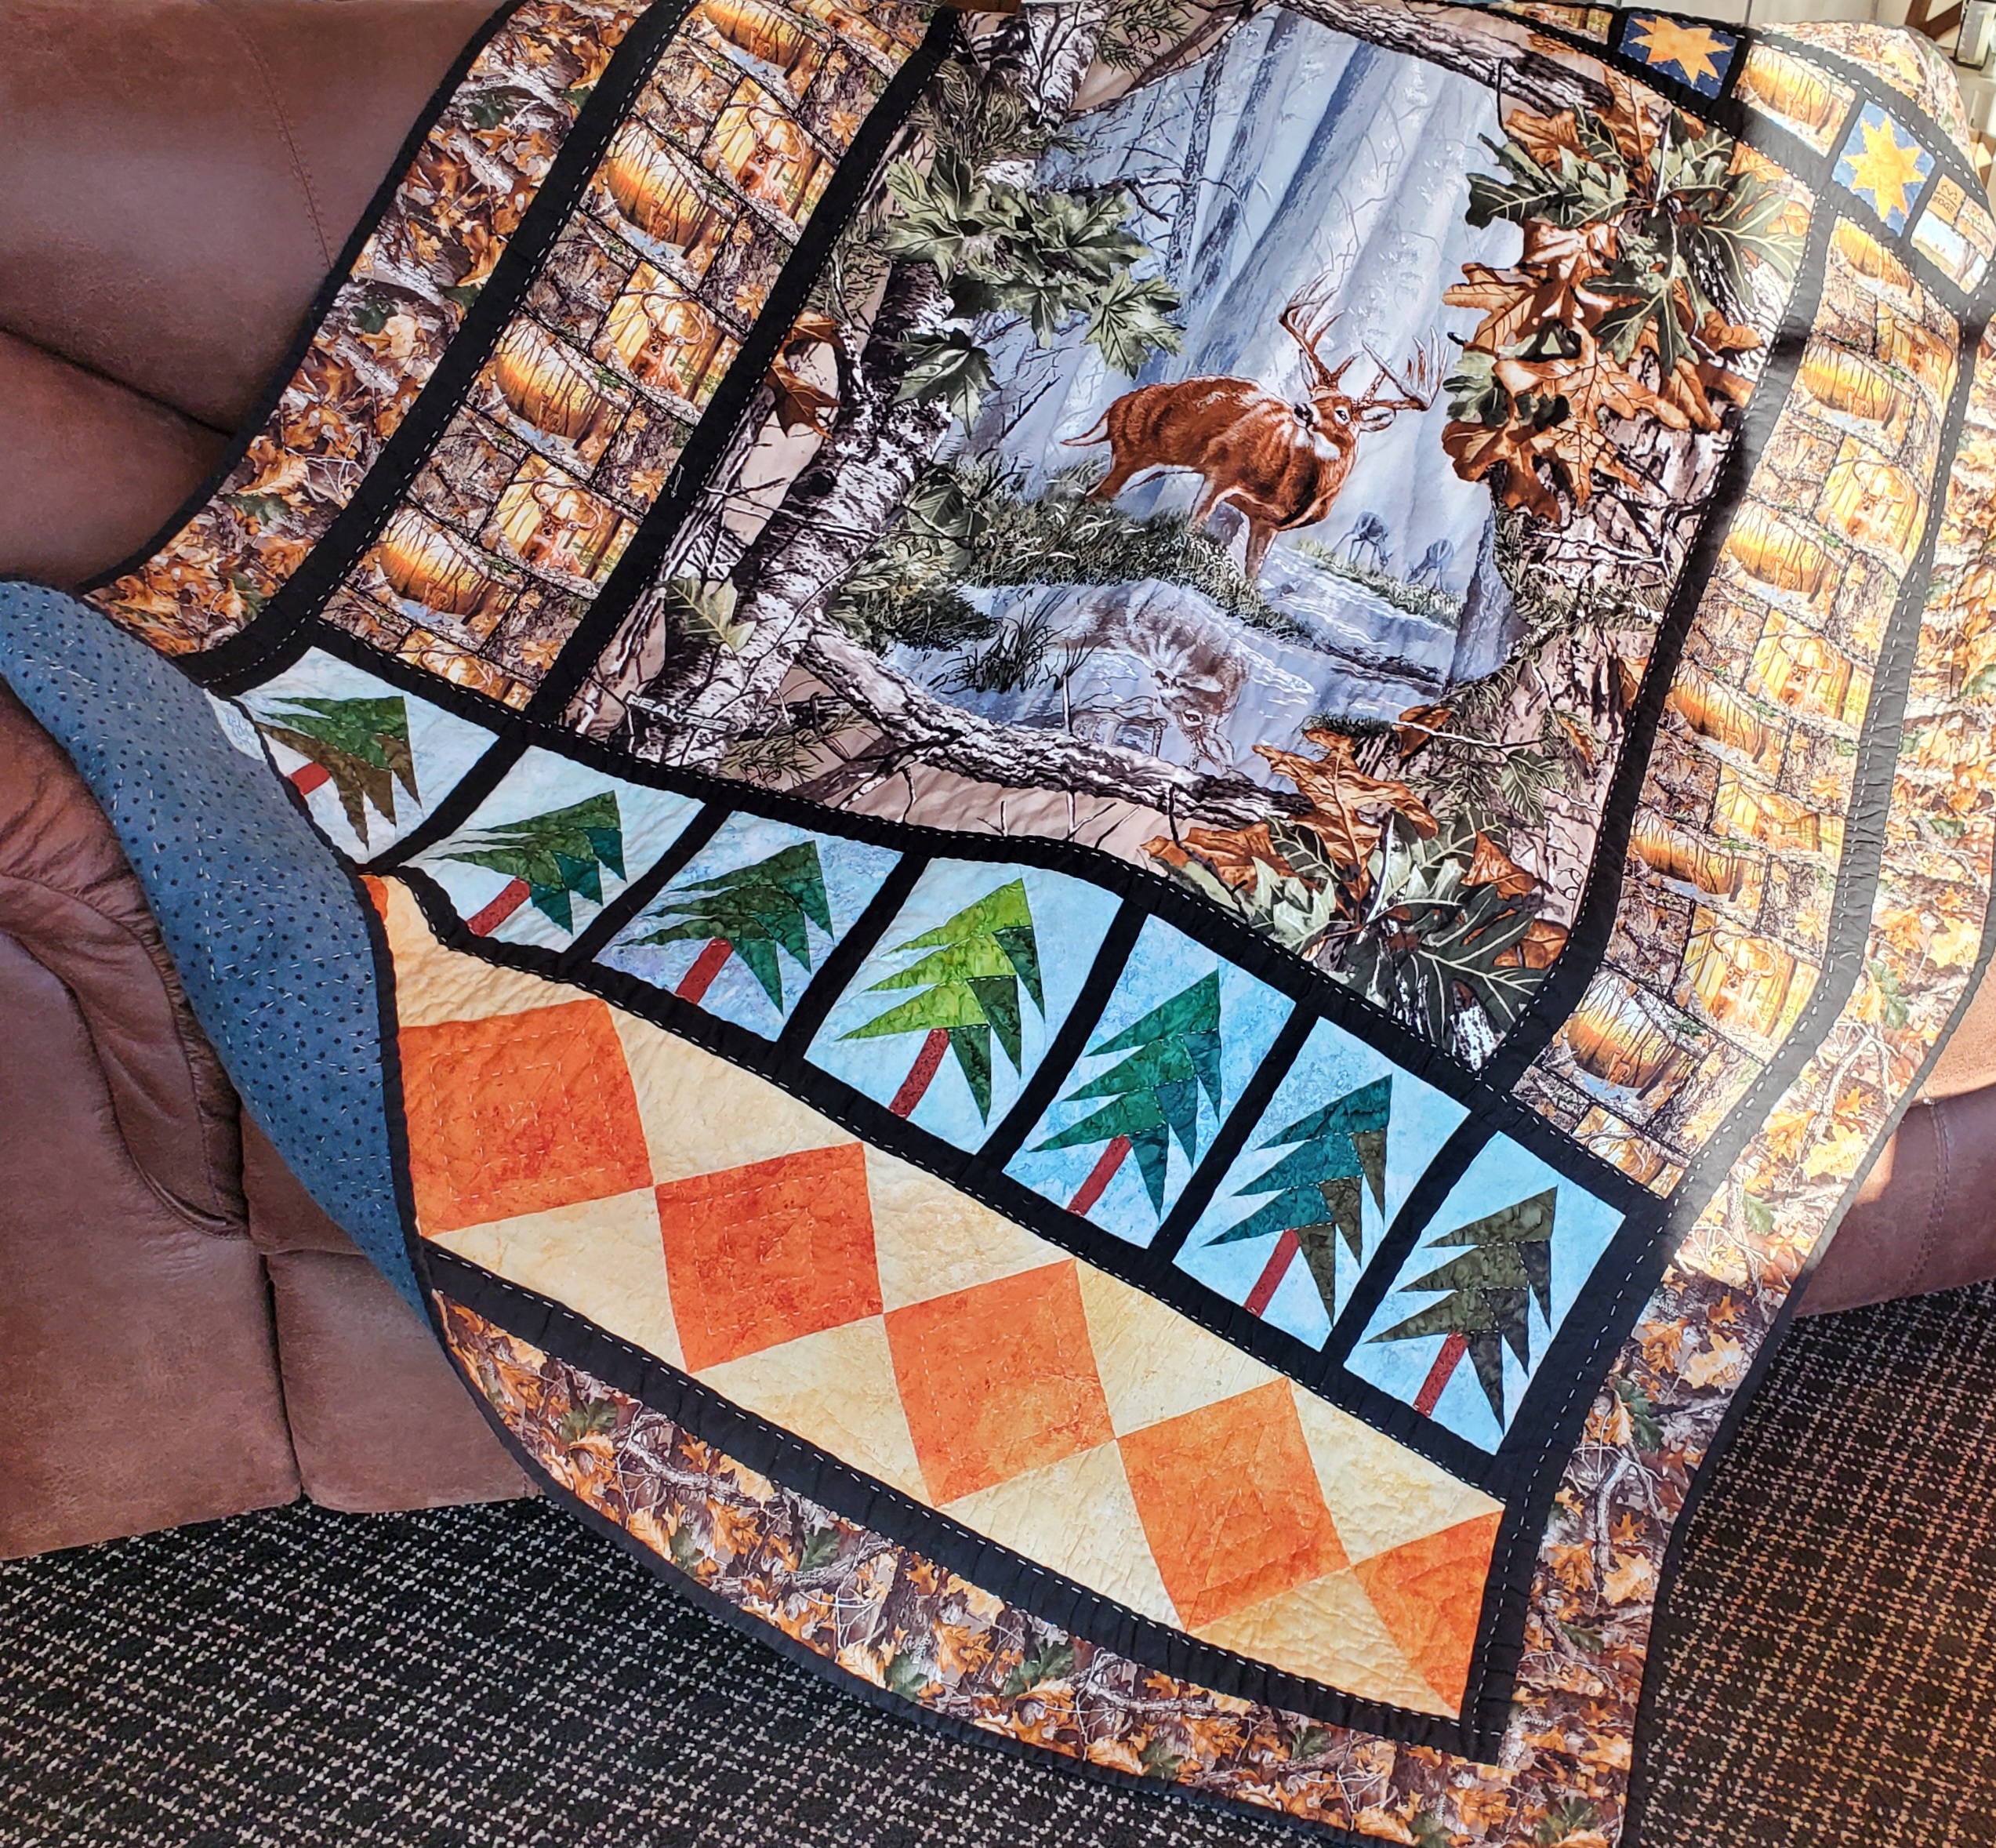 Deer in the Woods panel Quilt Finished! – Fran Beally's Blog